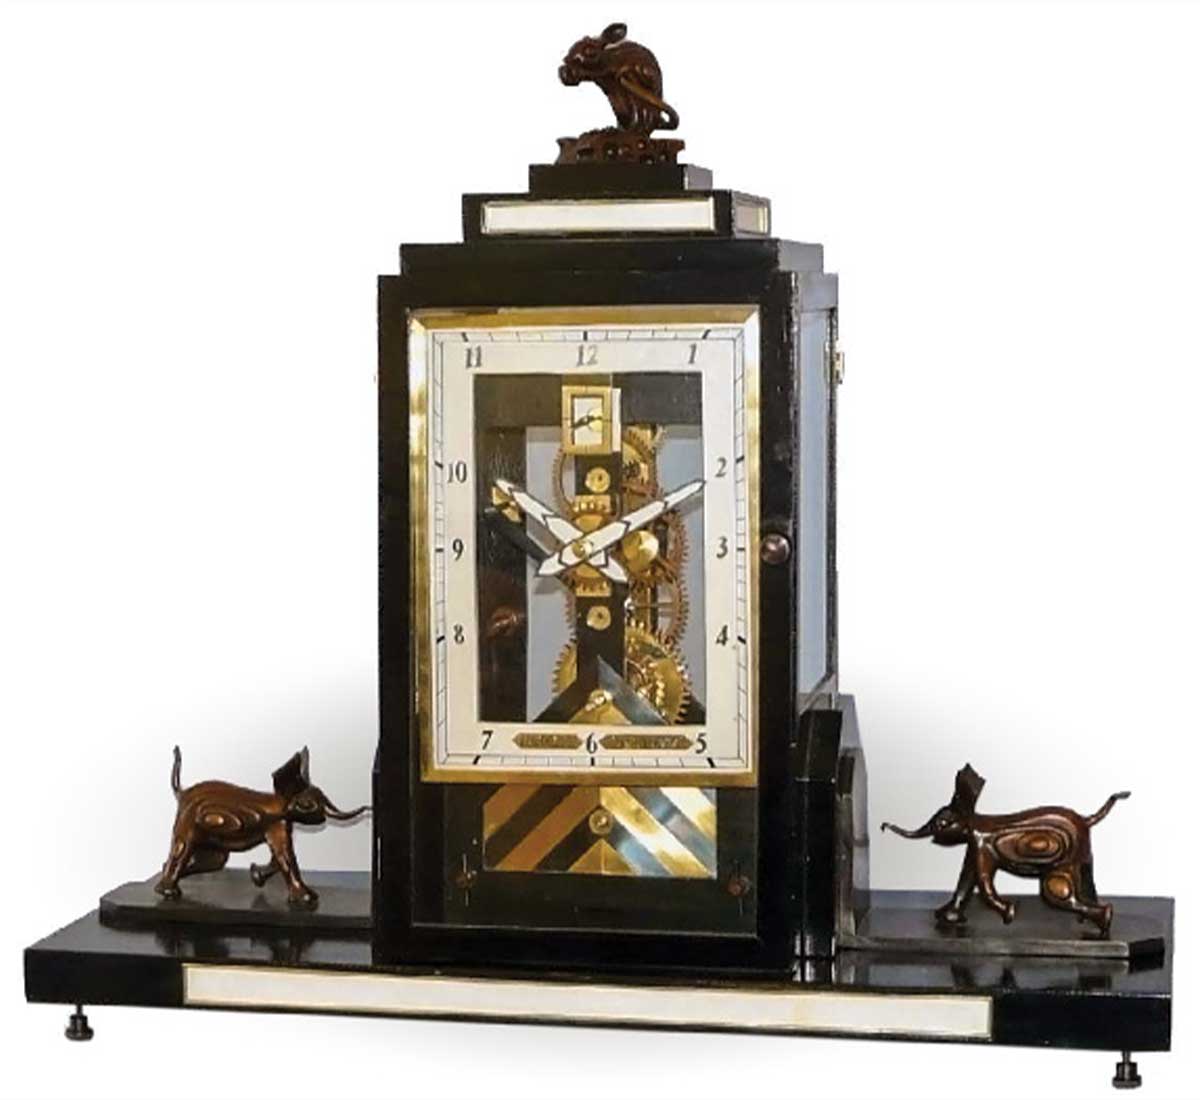 Lacquered art deco shelf clock with bronzed figures of two elephants on either side and a mouse sitting on top